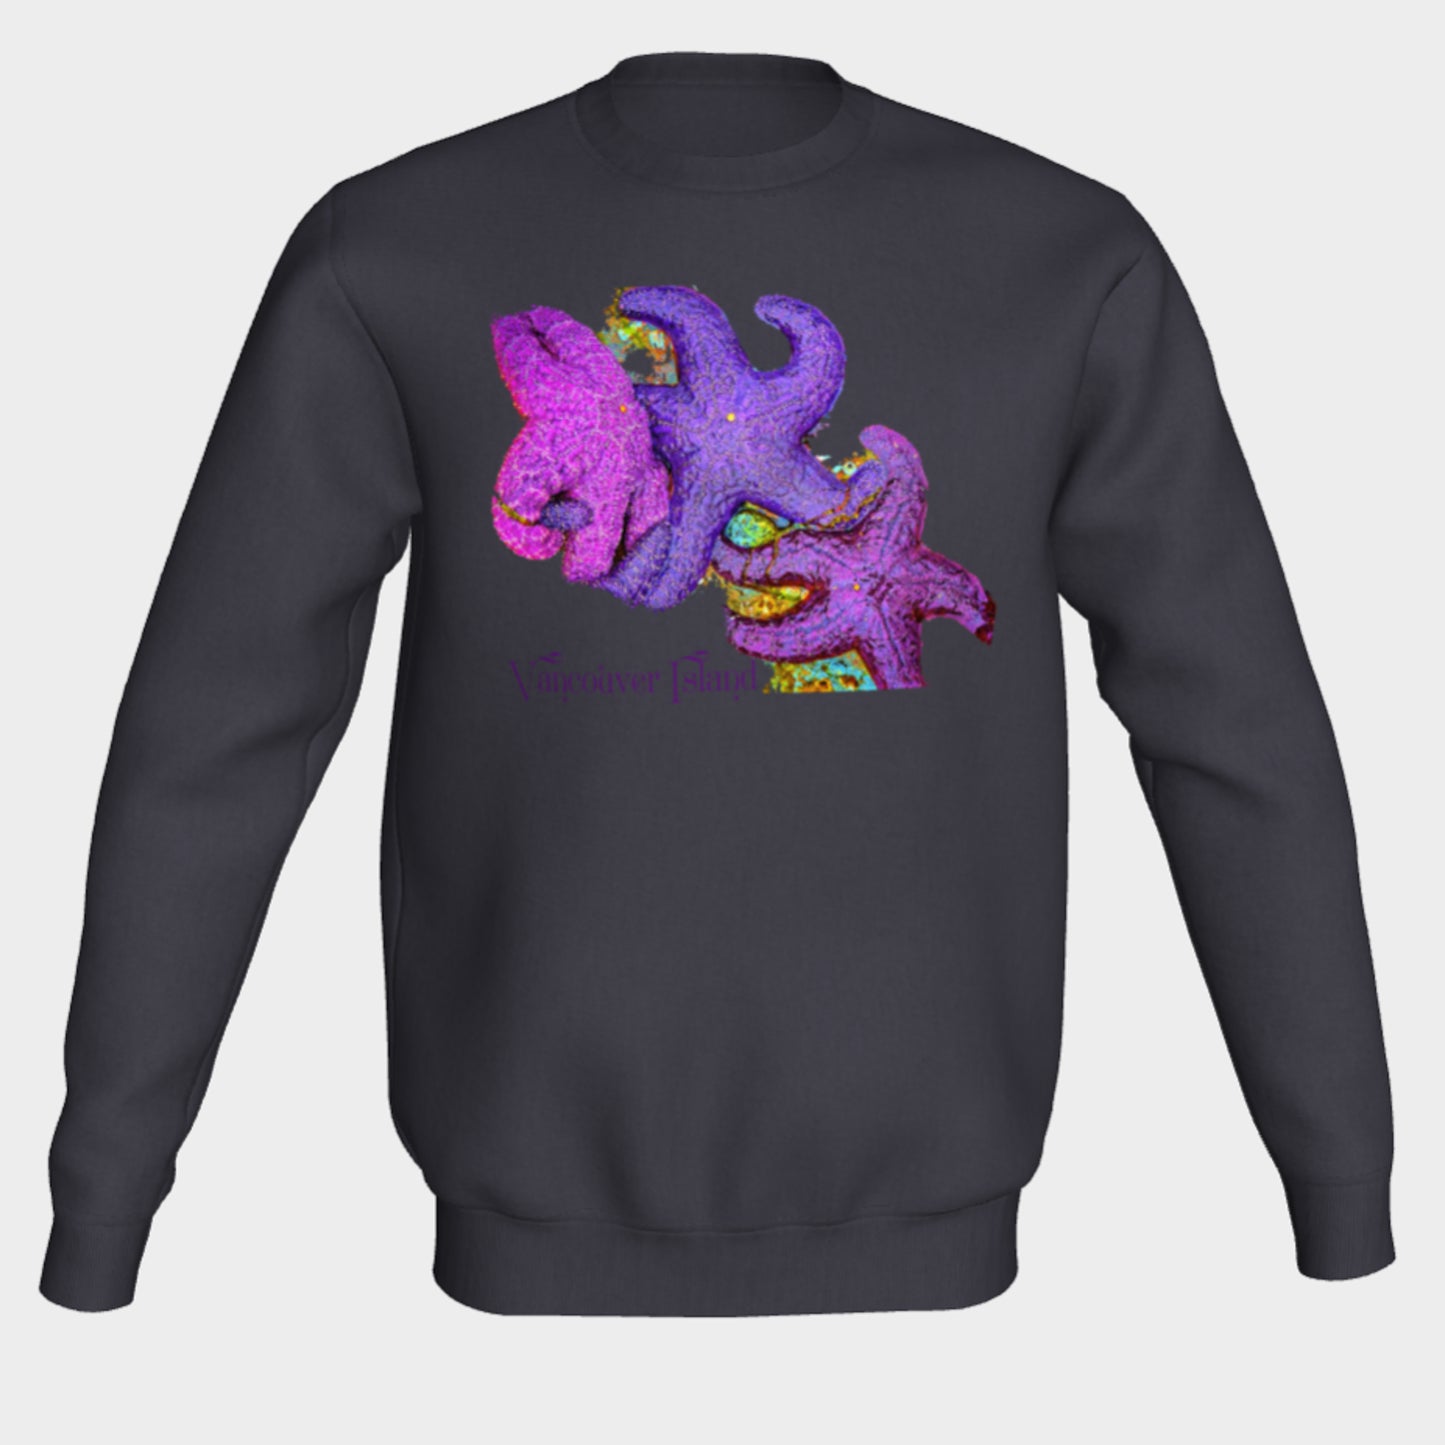 Starfish Cluster Vancouver Island Crewneck Sweatshirt What’s better than a super cozy sweatshirt? A super cozy sweatshirt from Van Isle Goddess!  Super cozy unisex sweatshirt for those chilly days.  Excellent for men or women.   Fit is roomy and comfortable. 